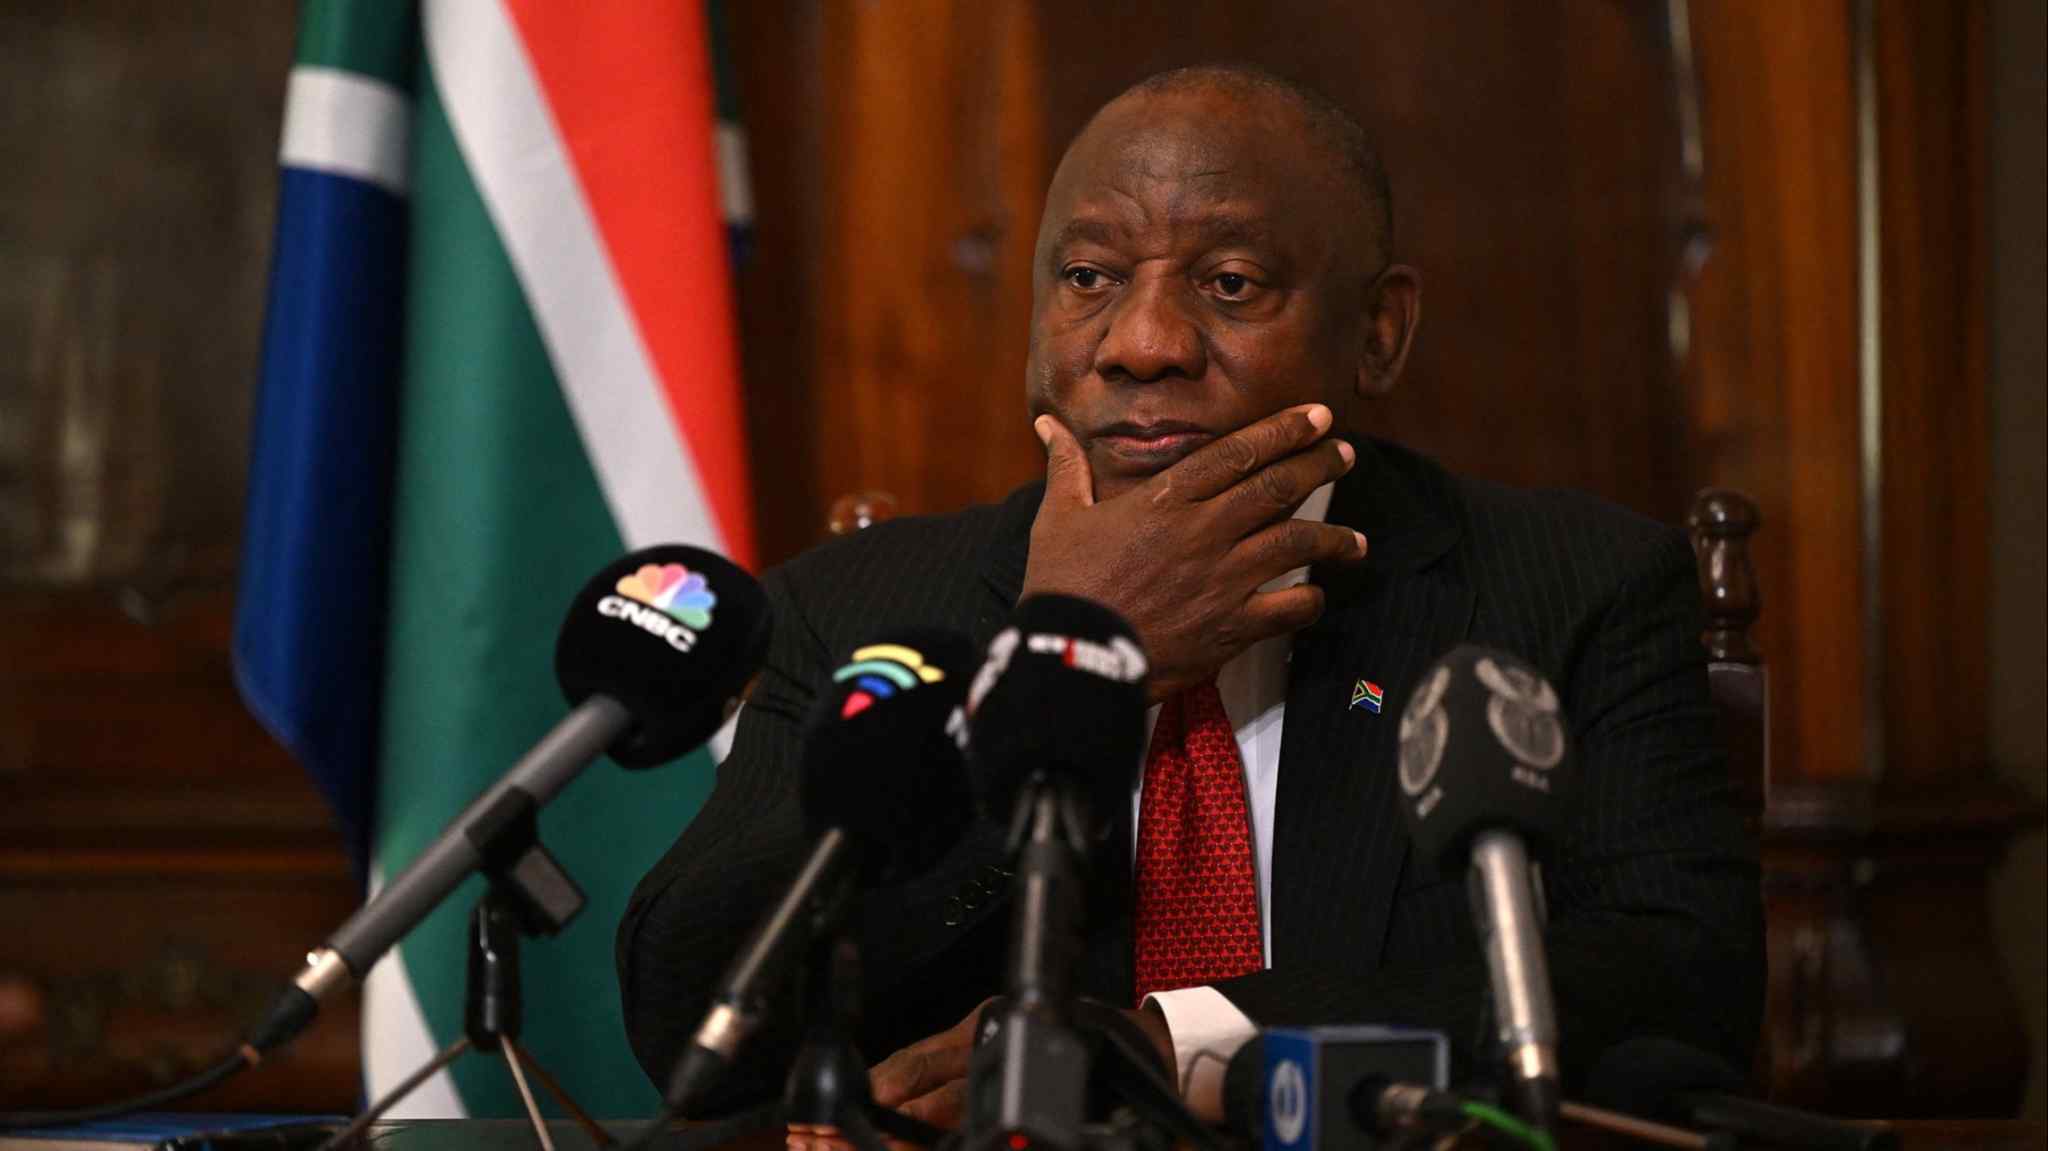 Ramaphosa ‘abused position’ in cash theft probe, panel reports